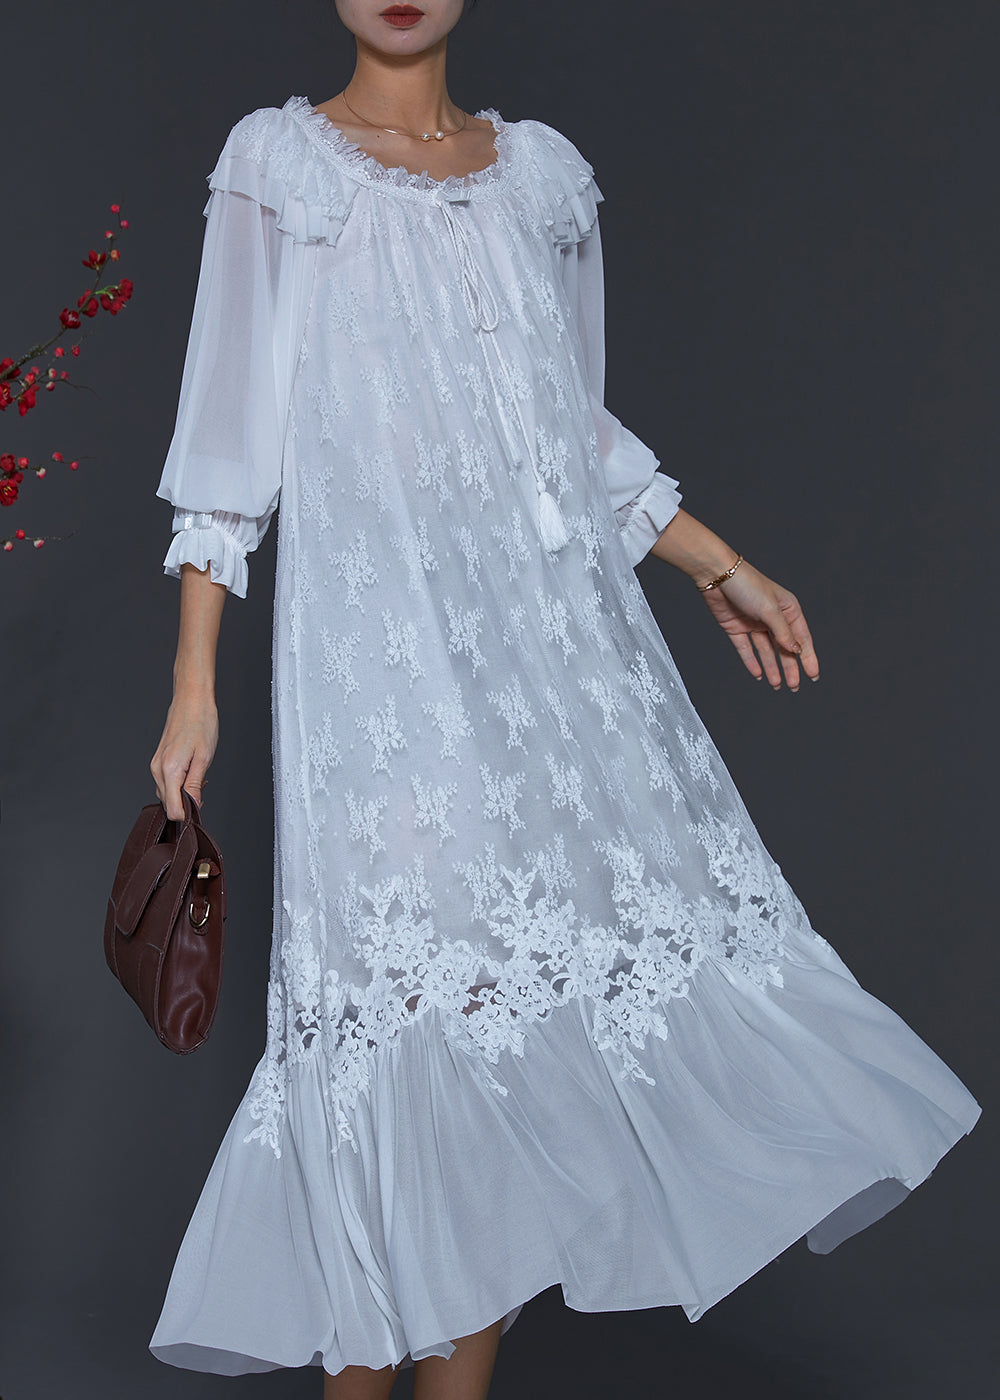 Elegant White Embroidered Patchwork Lace Dresses Spring